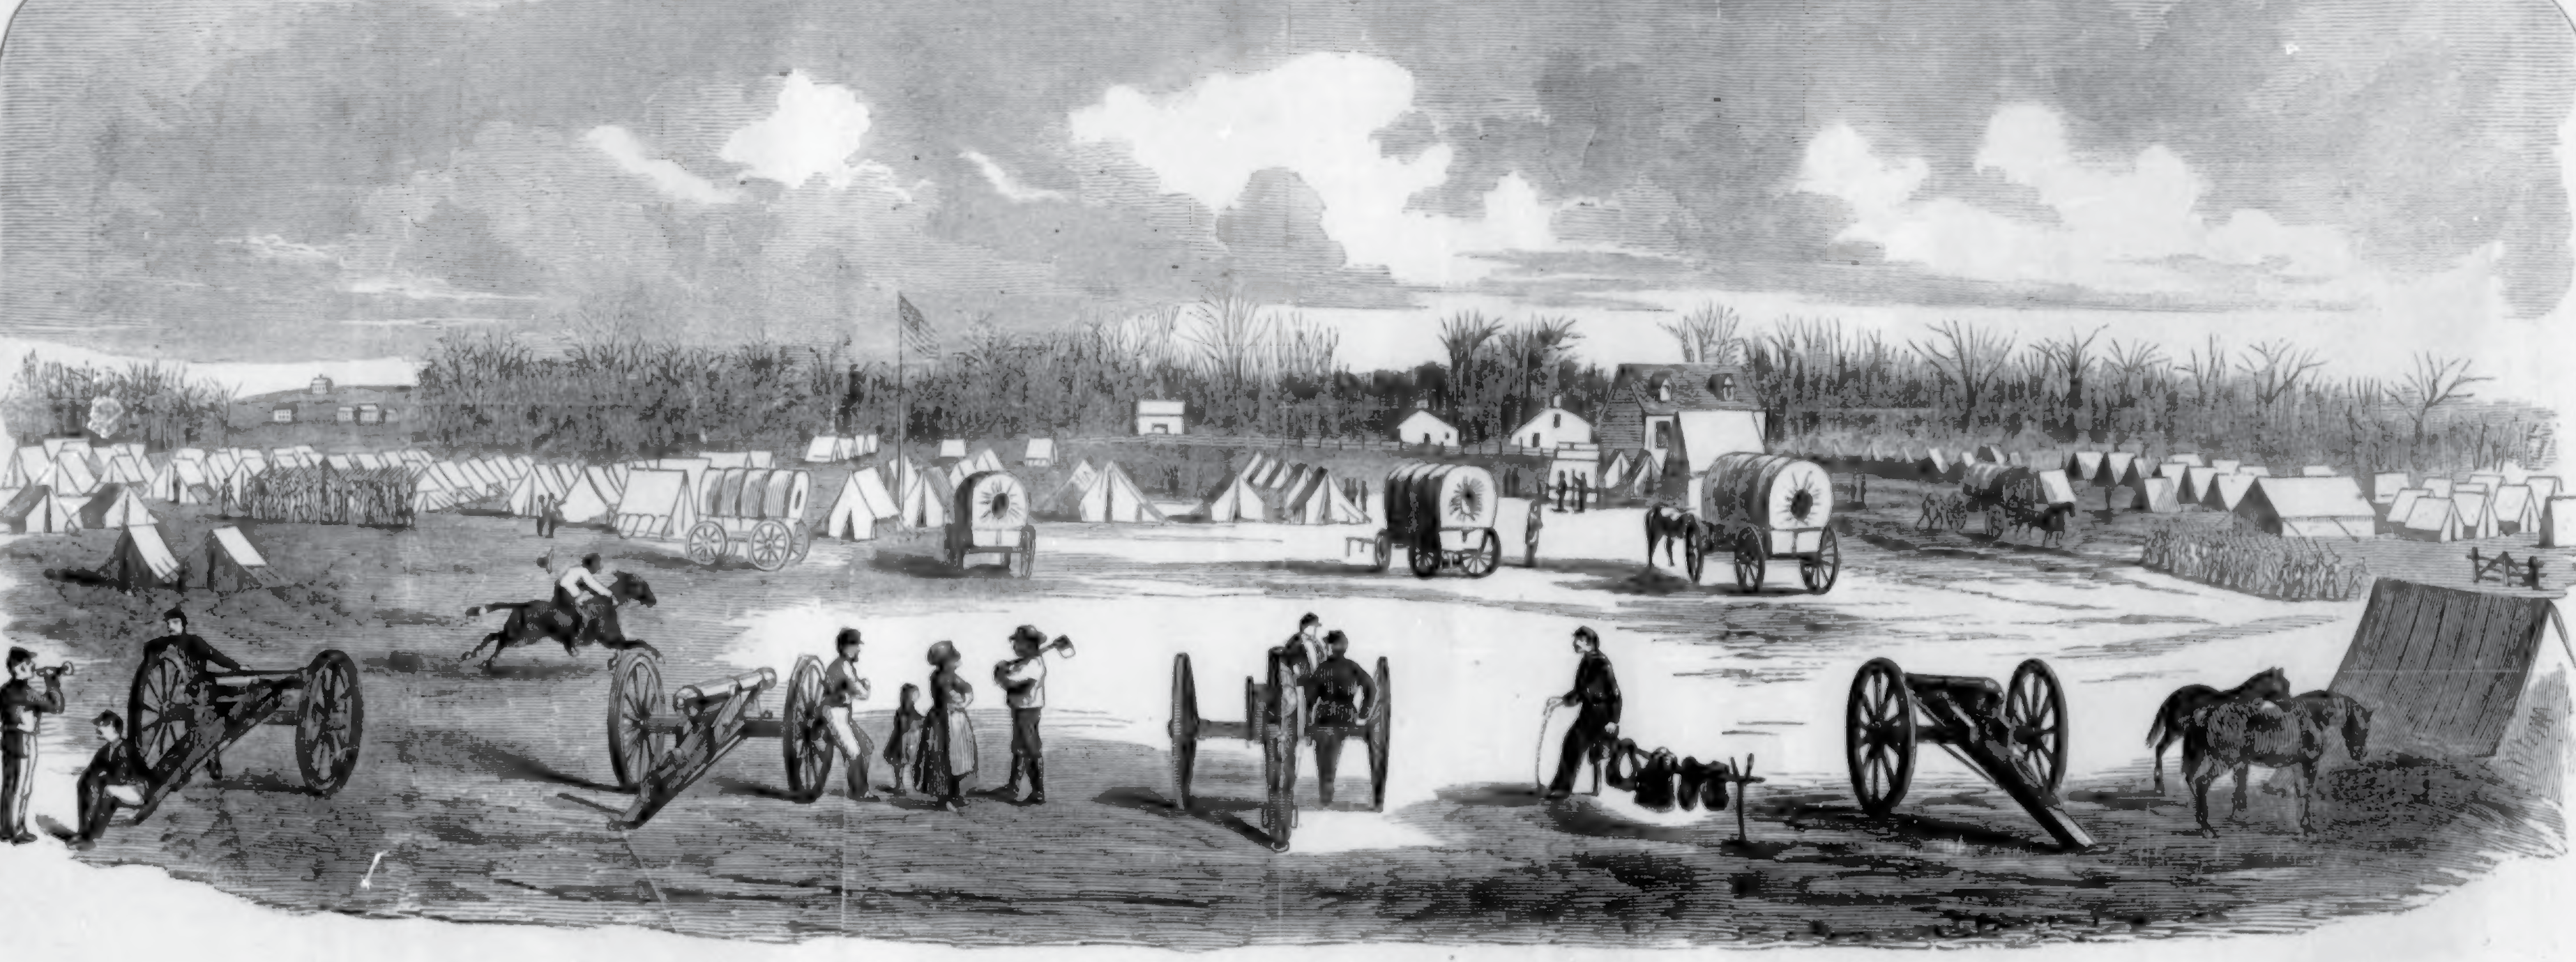 US camp, soldiers and cannon